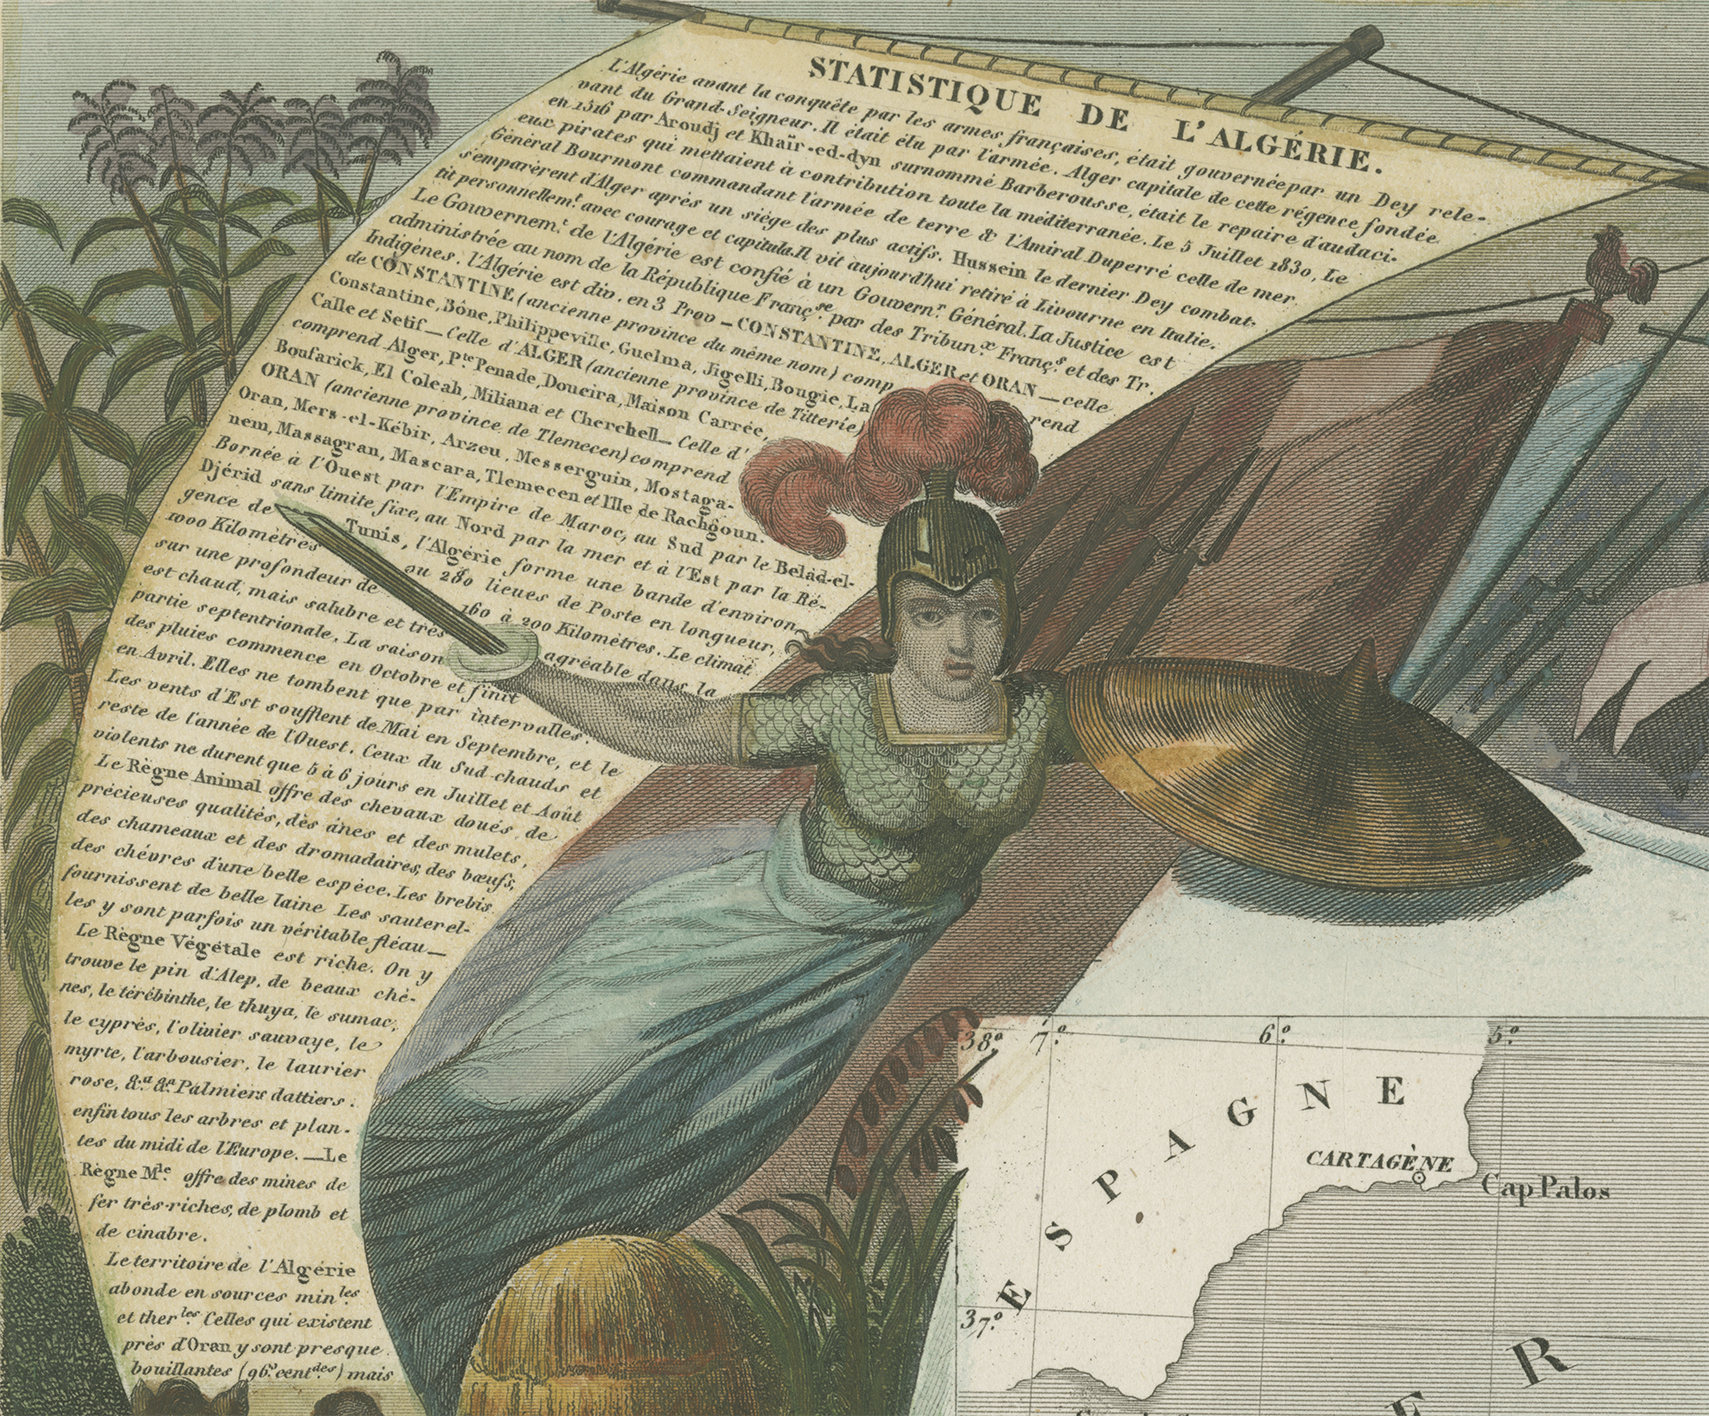 Closeup view of Lady Liberty-esque figure on map of Africa